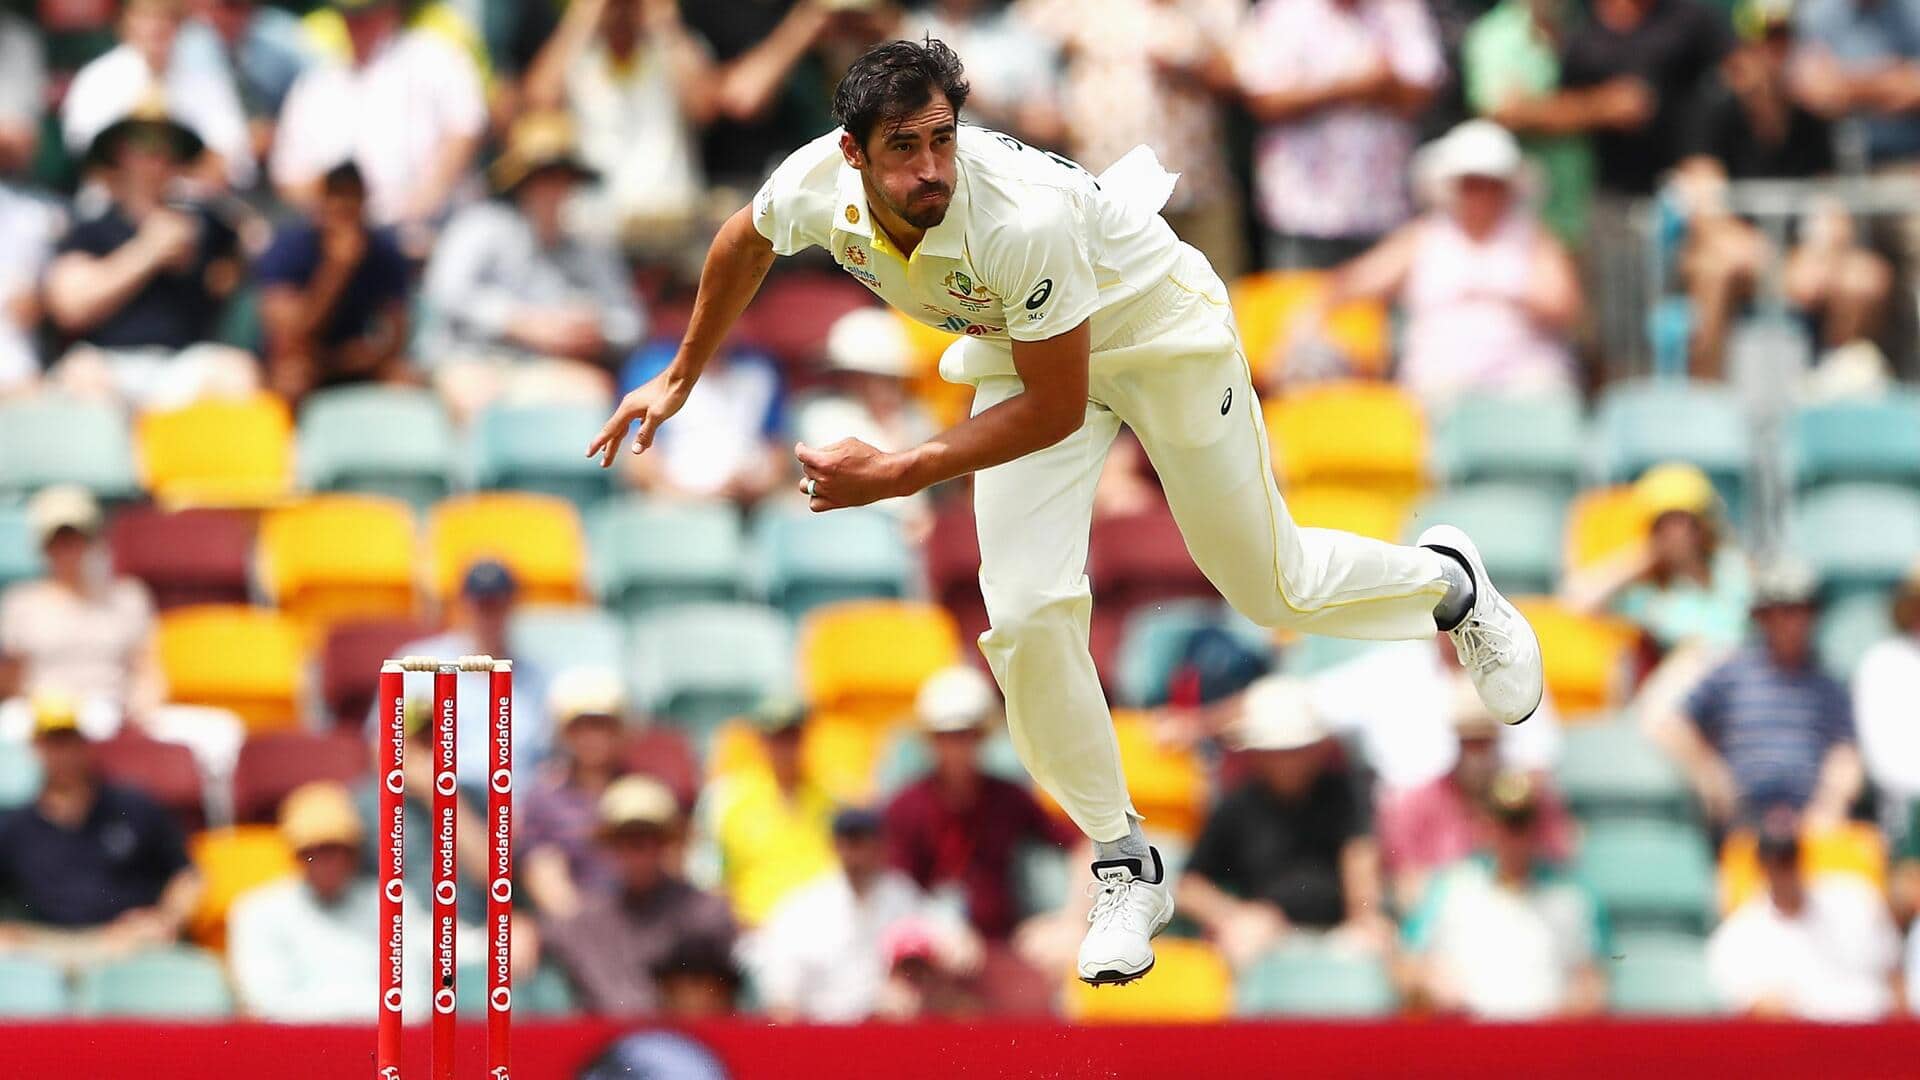 Mitchell Starc becomes third Australian seamer with this feat (Tests)